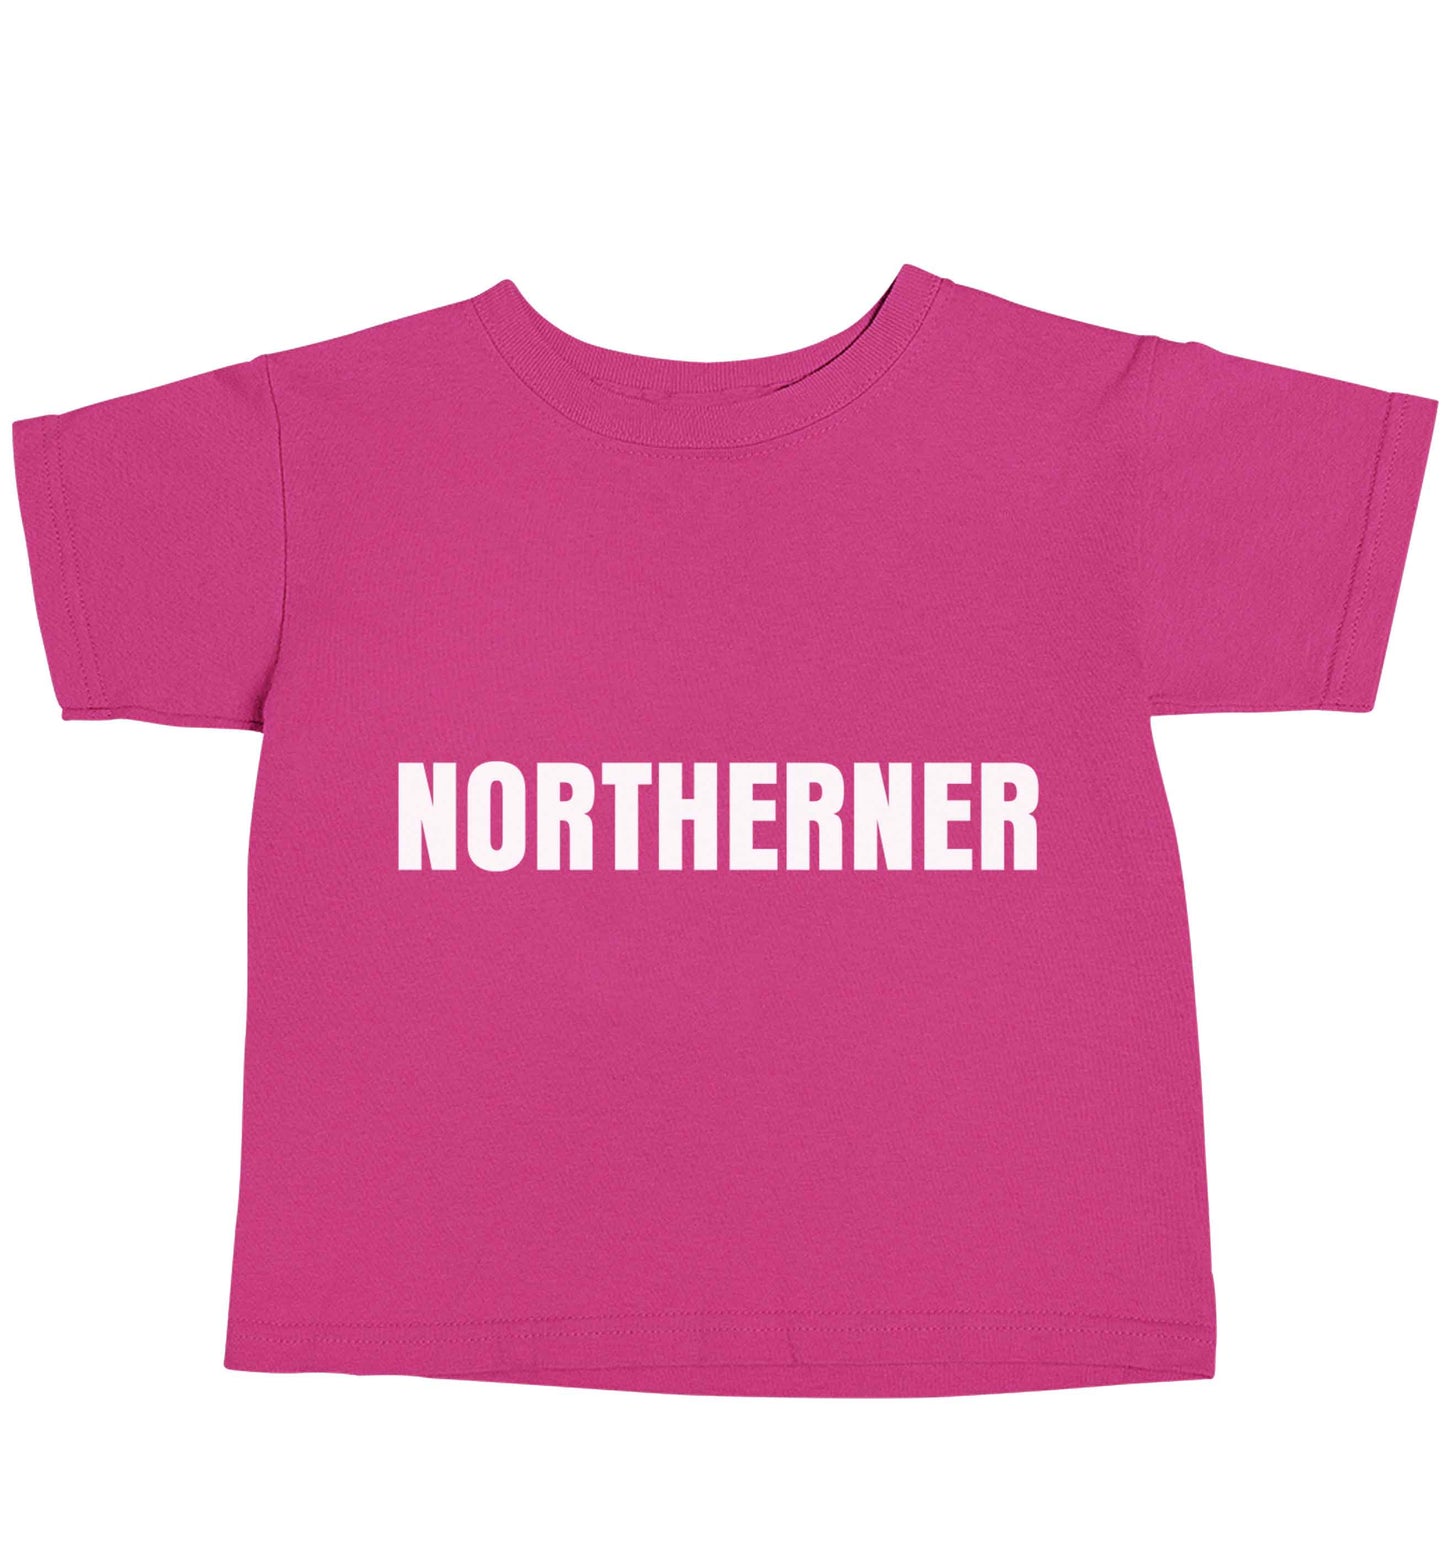 Northerner pink baby toddler Tshirt 2 Years